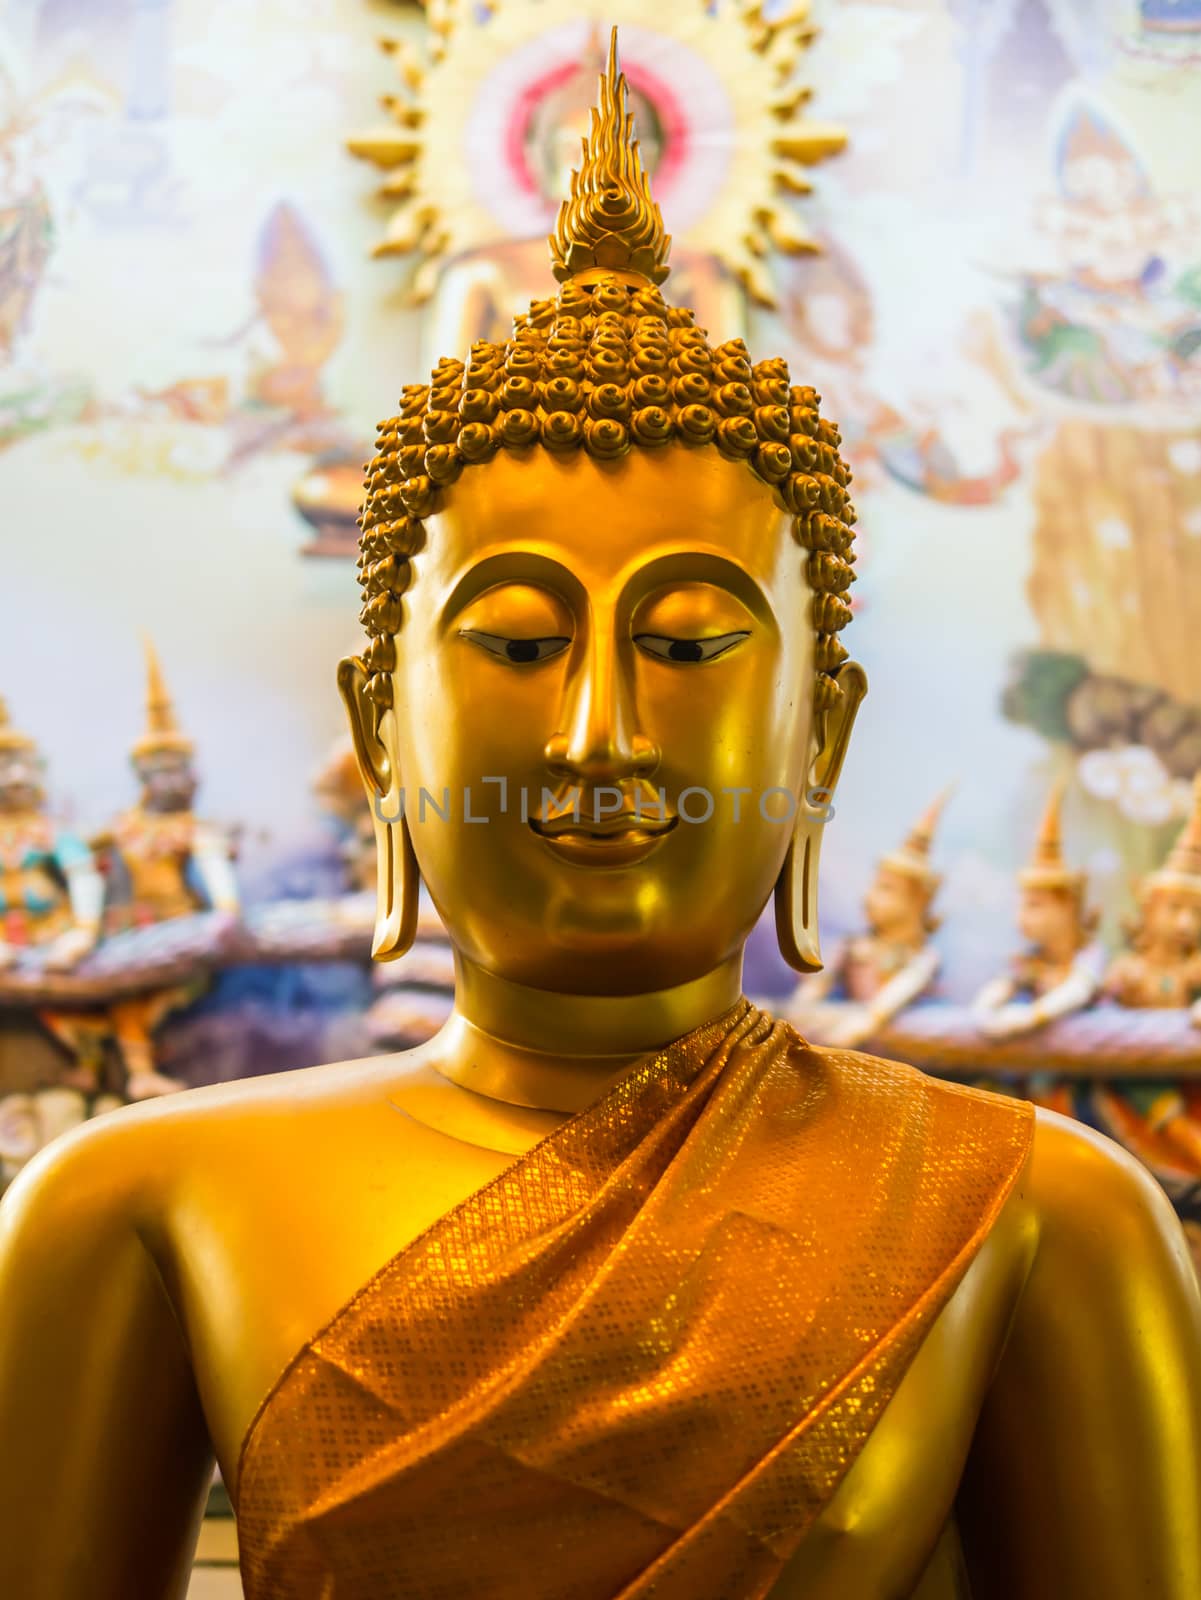 Buddha statues are a beautiful golden color by golengstock